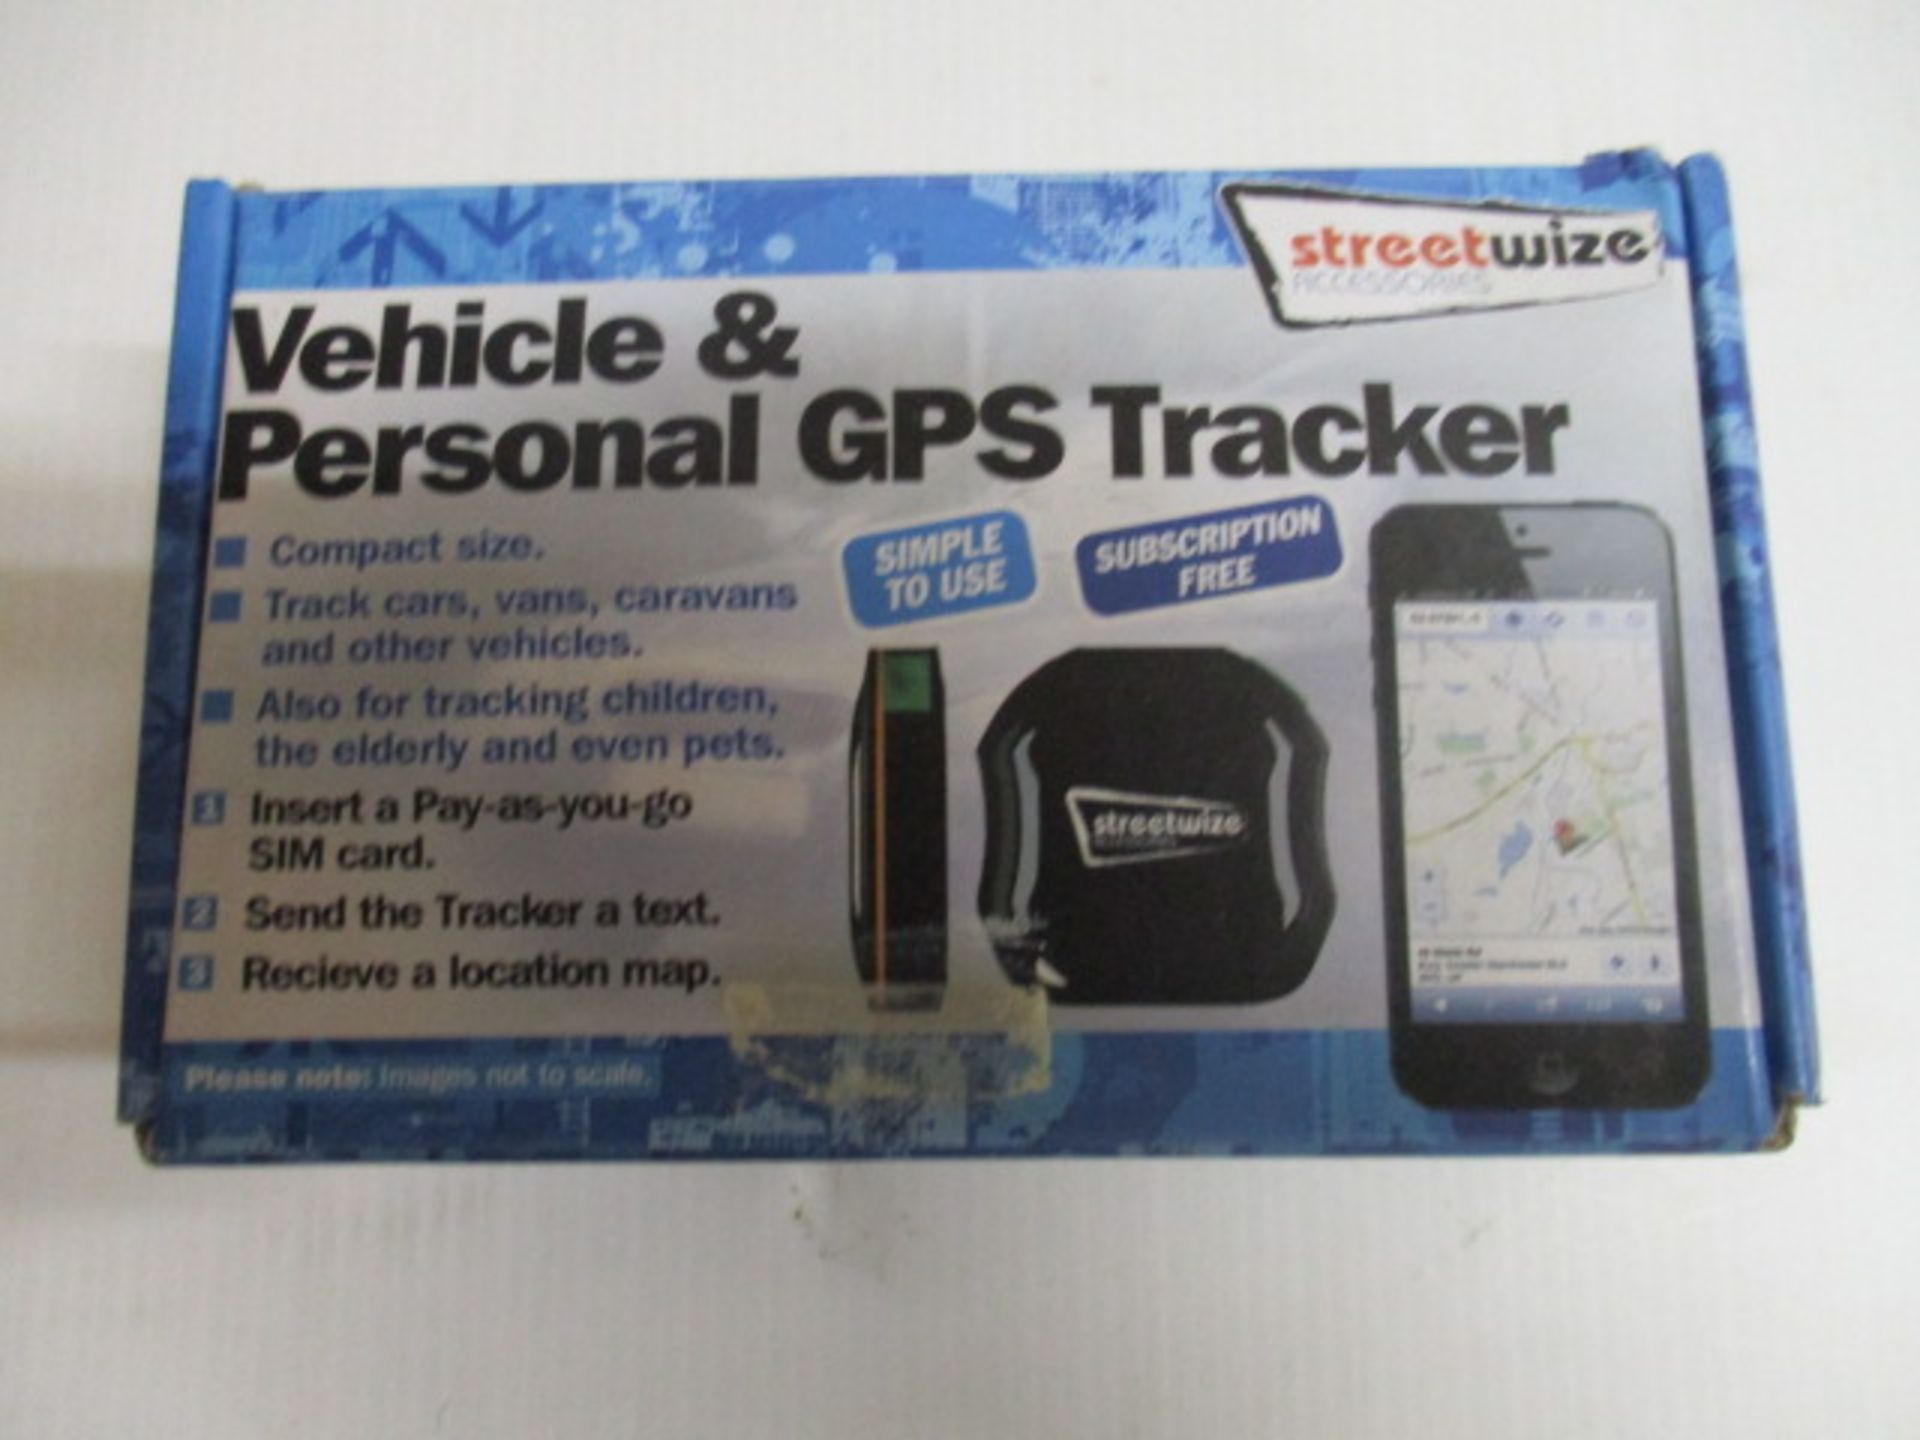 Vehicle and personal GPS tracker unit boxed